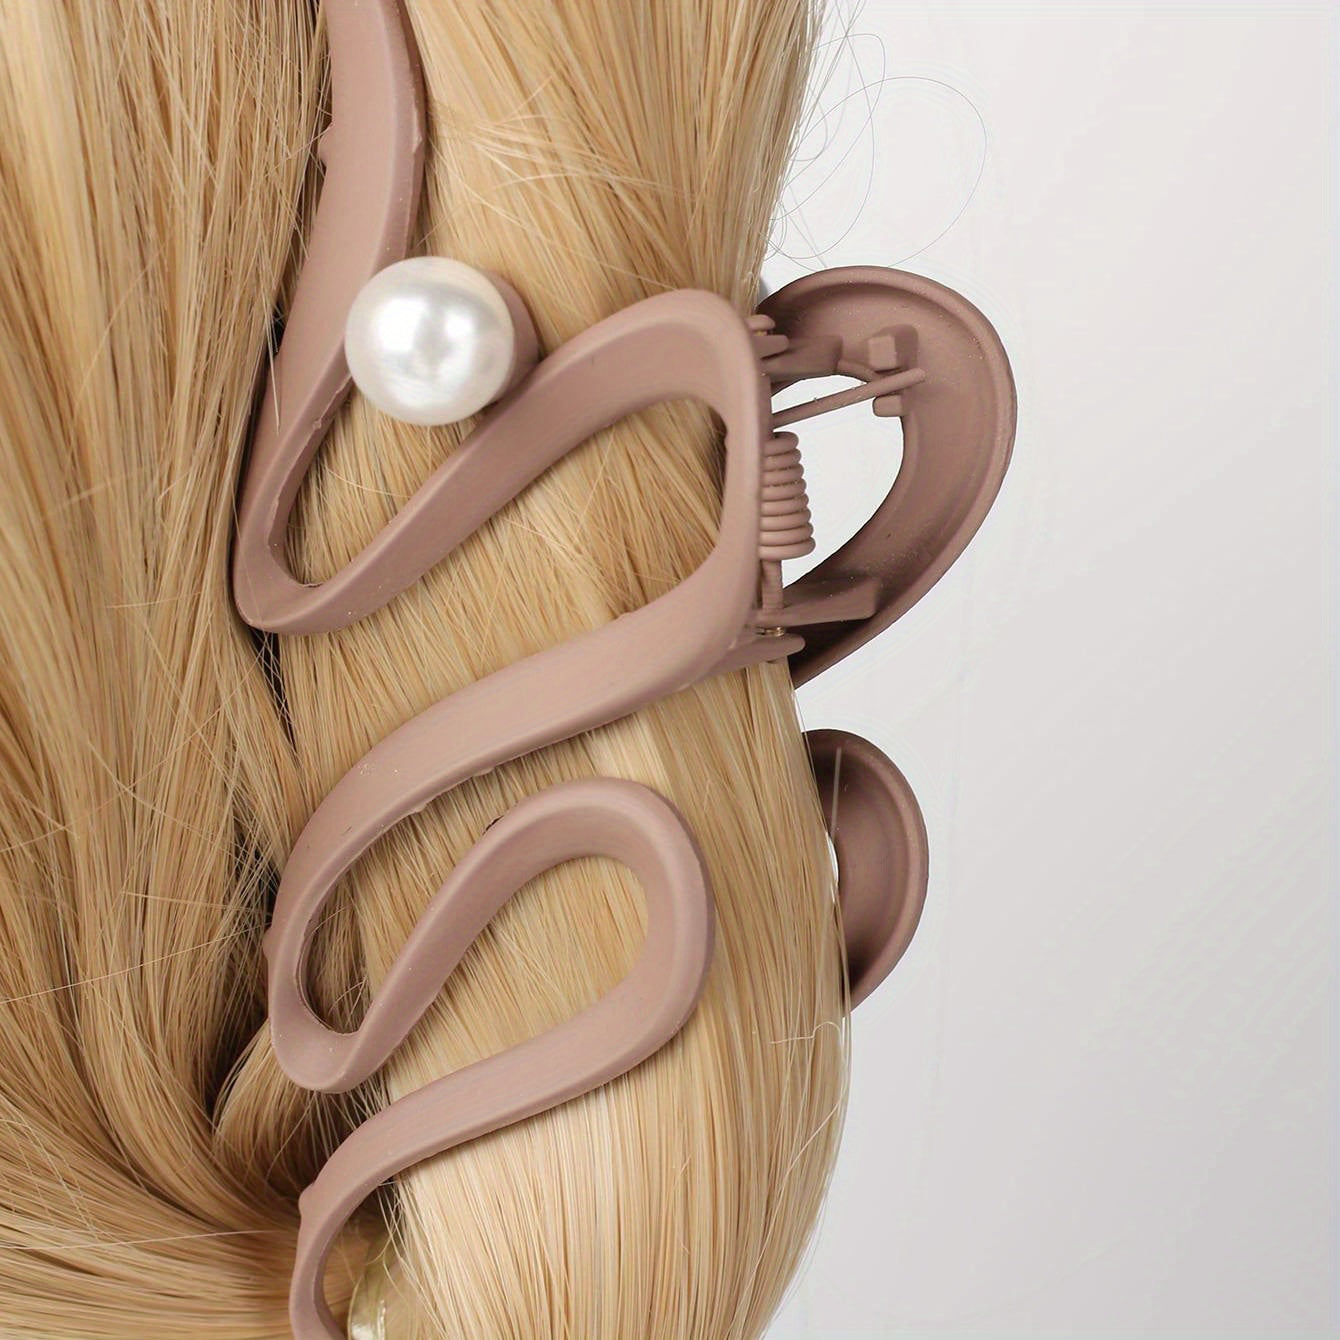 Get a Classy and Stylish Look with our Wavy Faux Pearl Hair Claw Clip - Non-Slip Strong Hold Grip for Thick Hair Accessories in Silvery Color